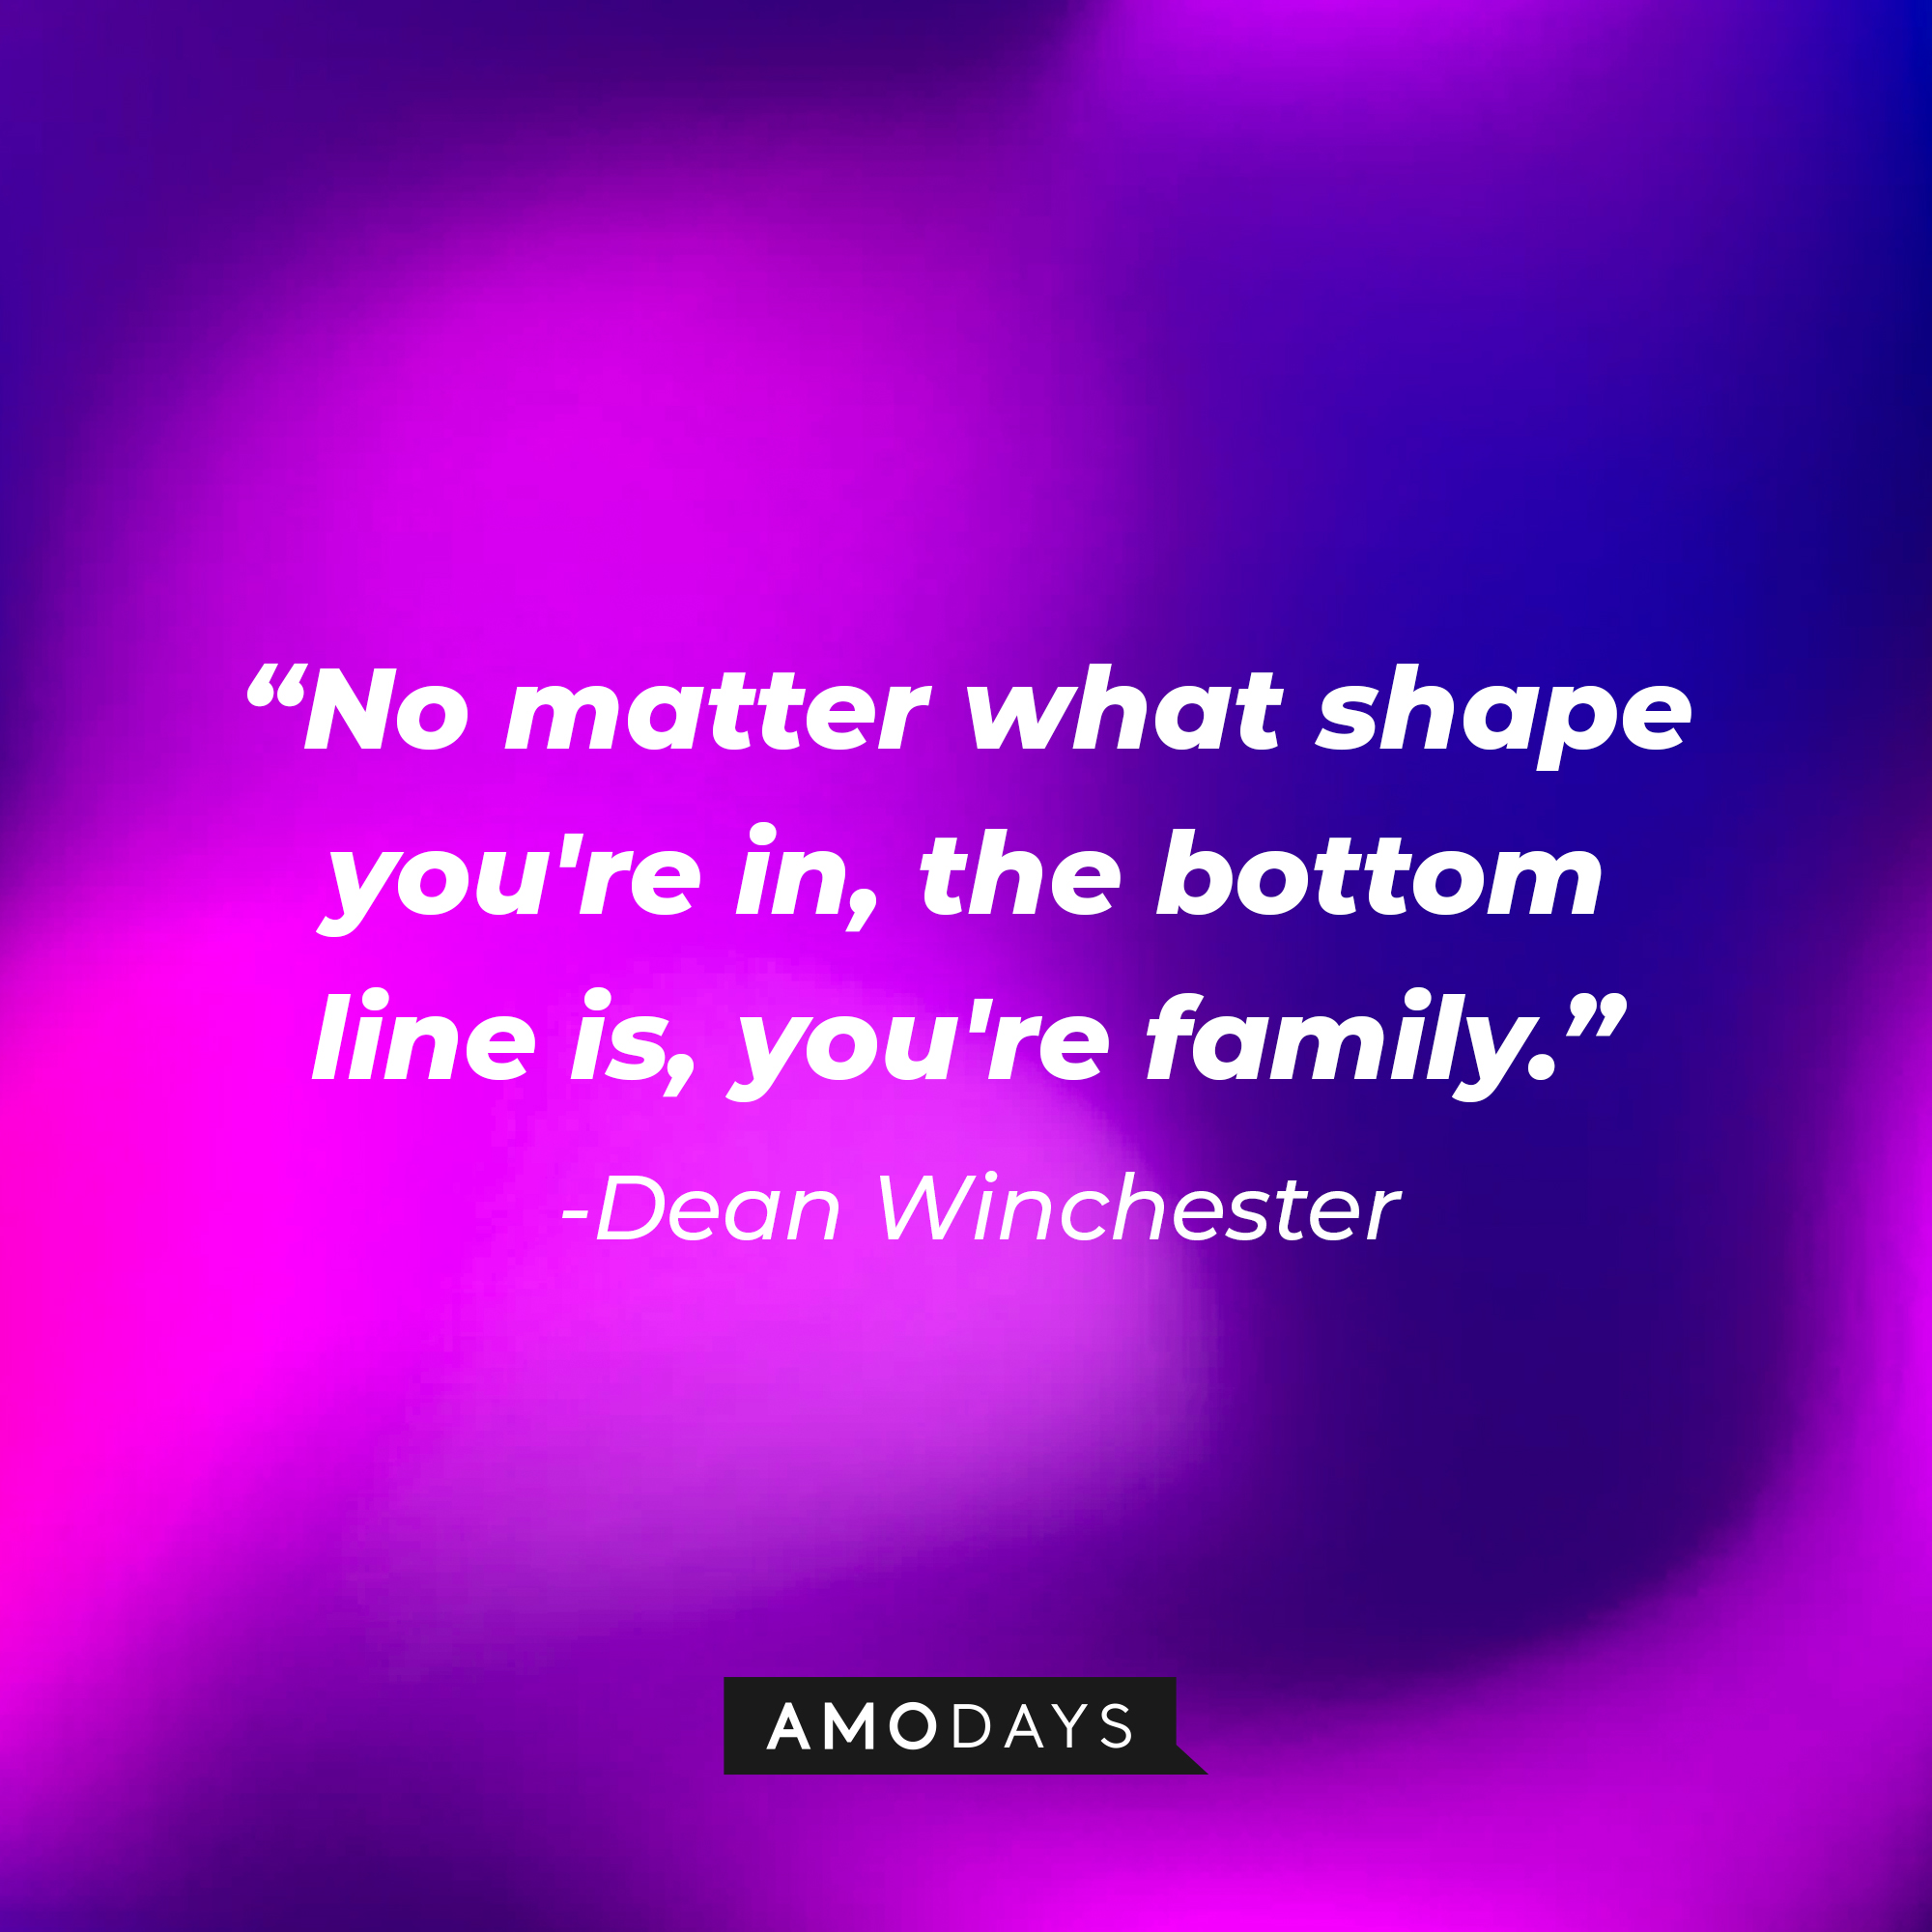 Dean Winchester's quote: “No matter what shape you're in, the bottom line is, you're family.”  | Source: AmoDays